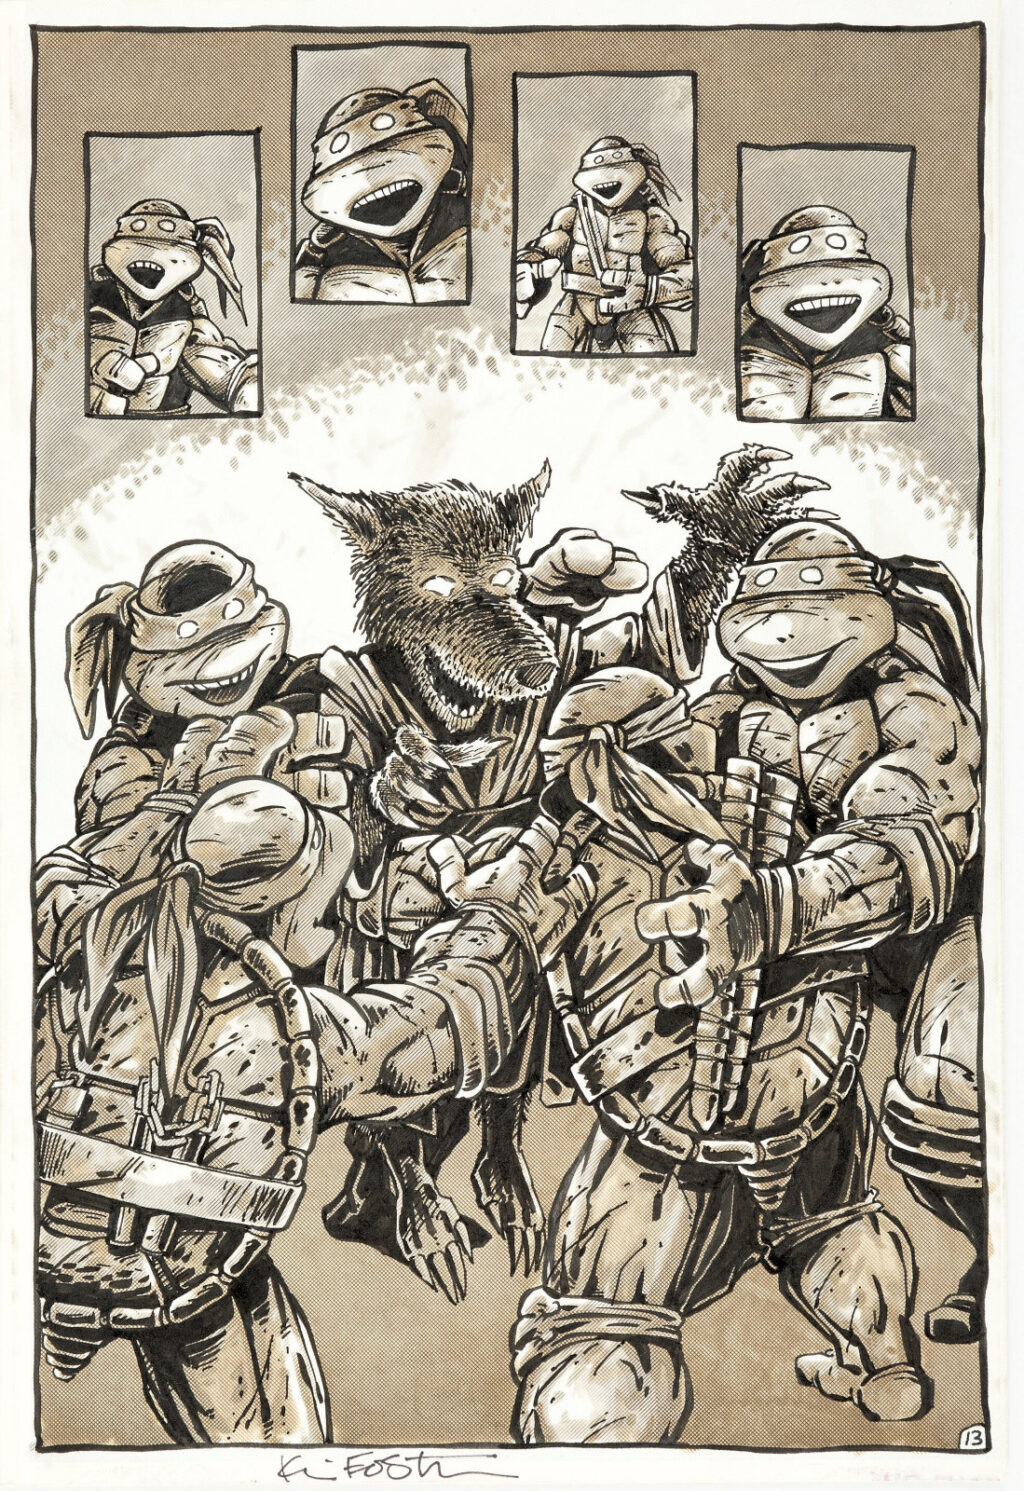 Teenage Mutant Ninja Turtles issue 7 page 13 by Kevin Eastman and Peter Laird